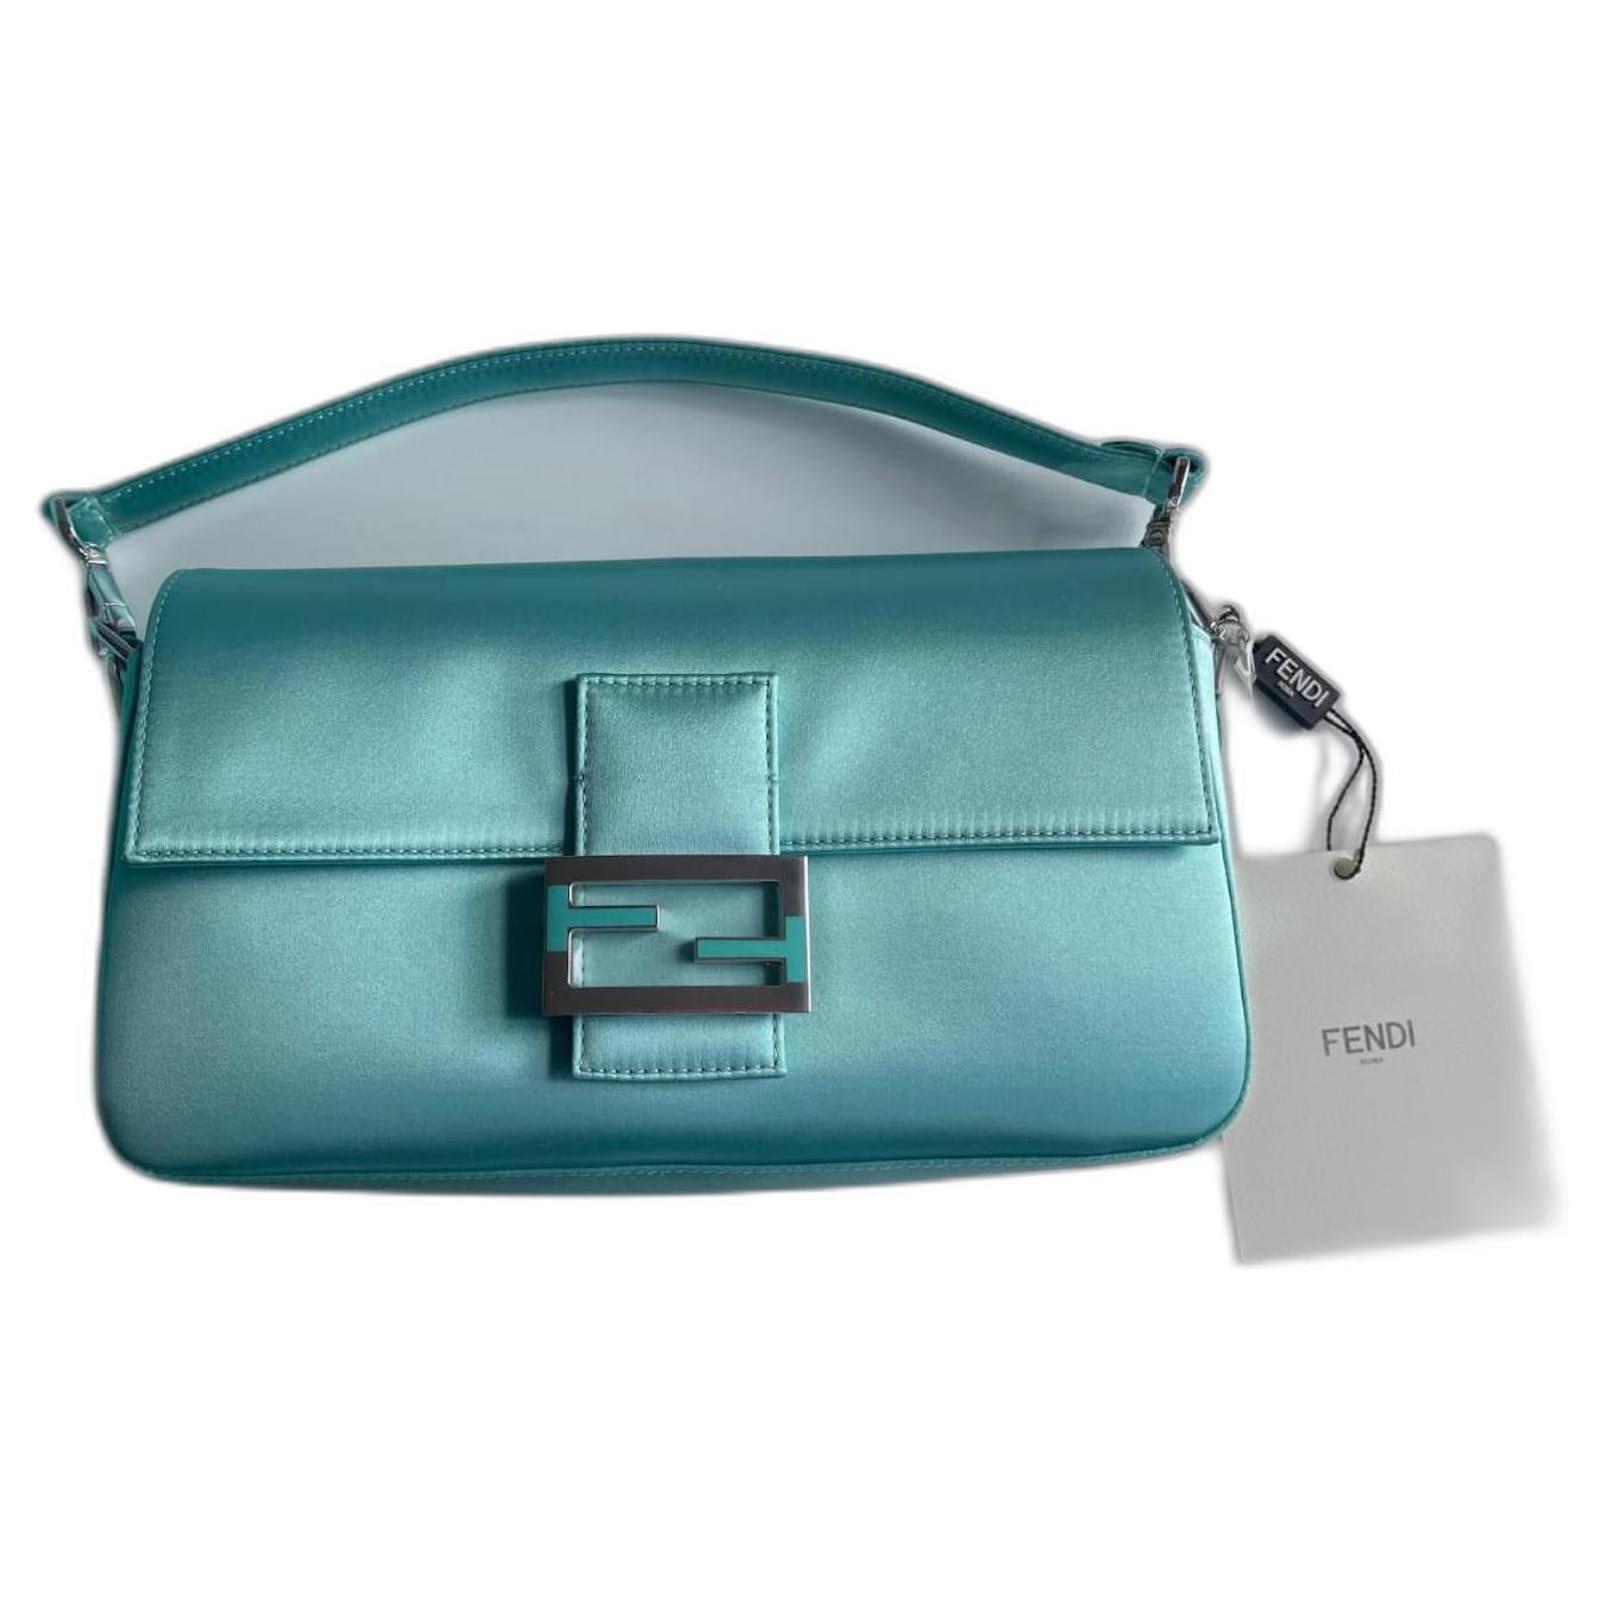 Baguette - Turquoise sequin and leather bag